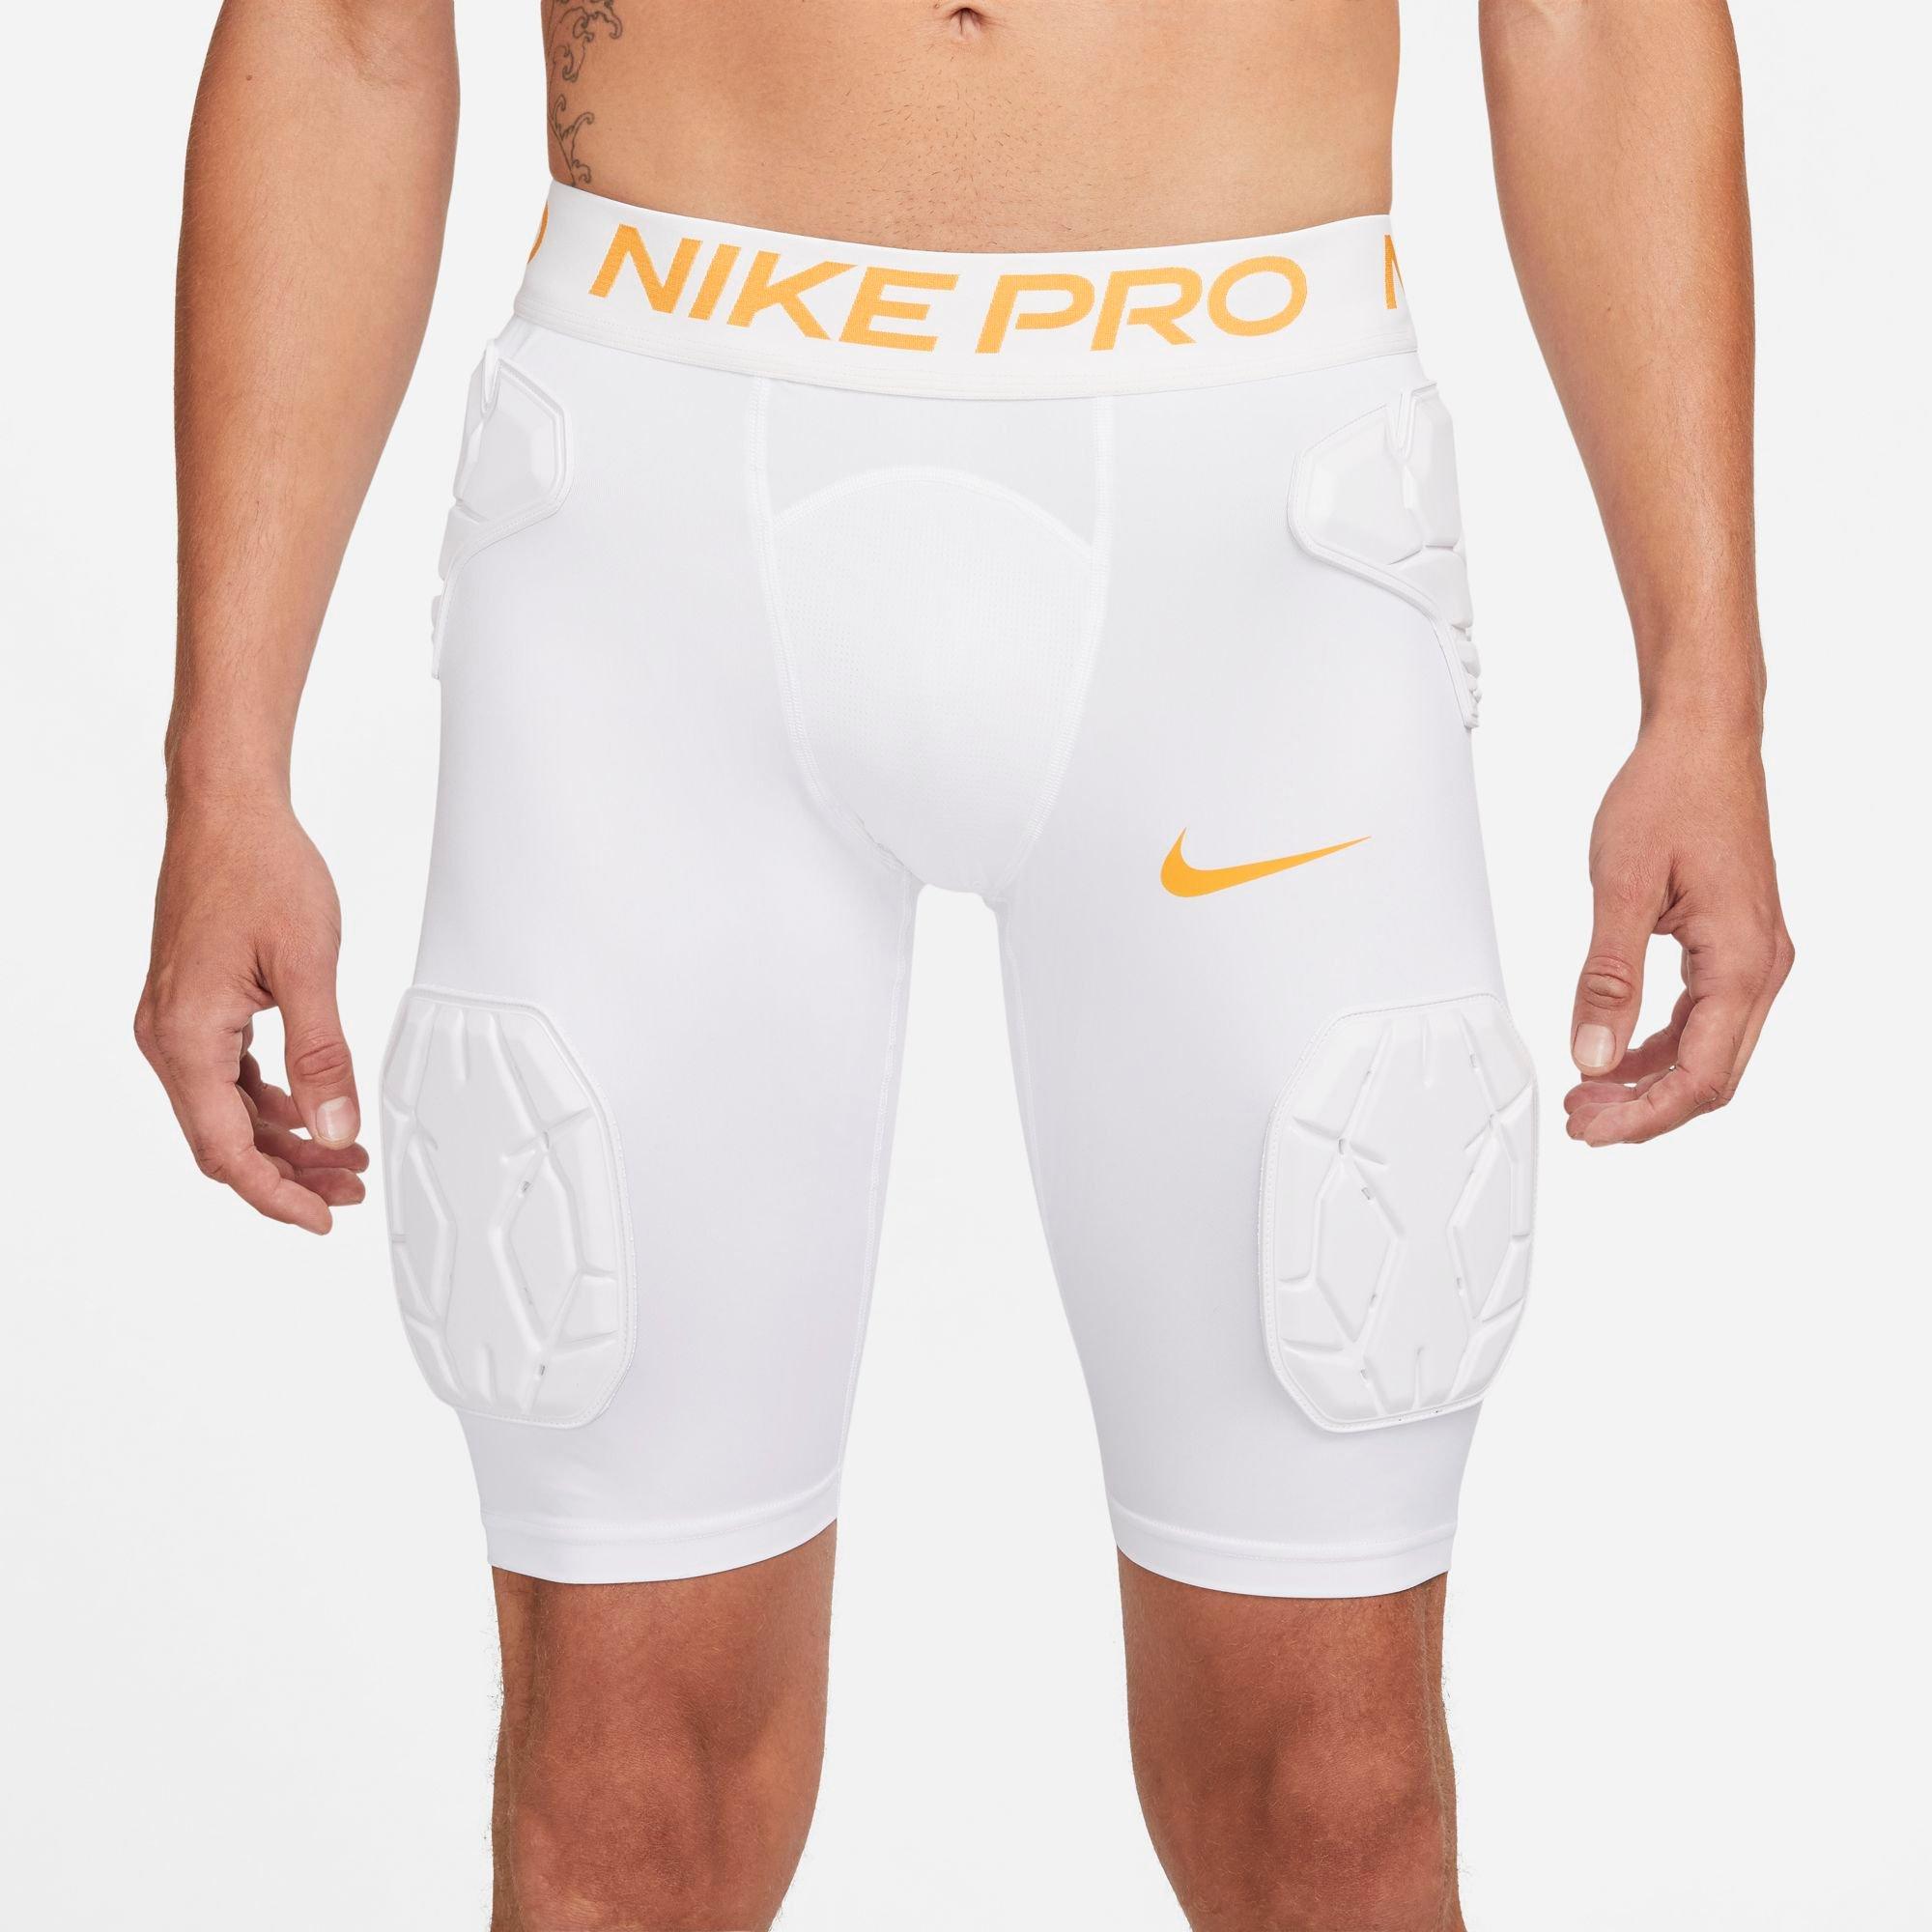 Nike Pro Combat Hyperstrong Football Padded Girdle Size 3XL for